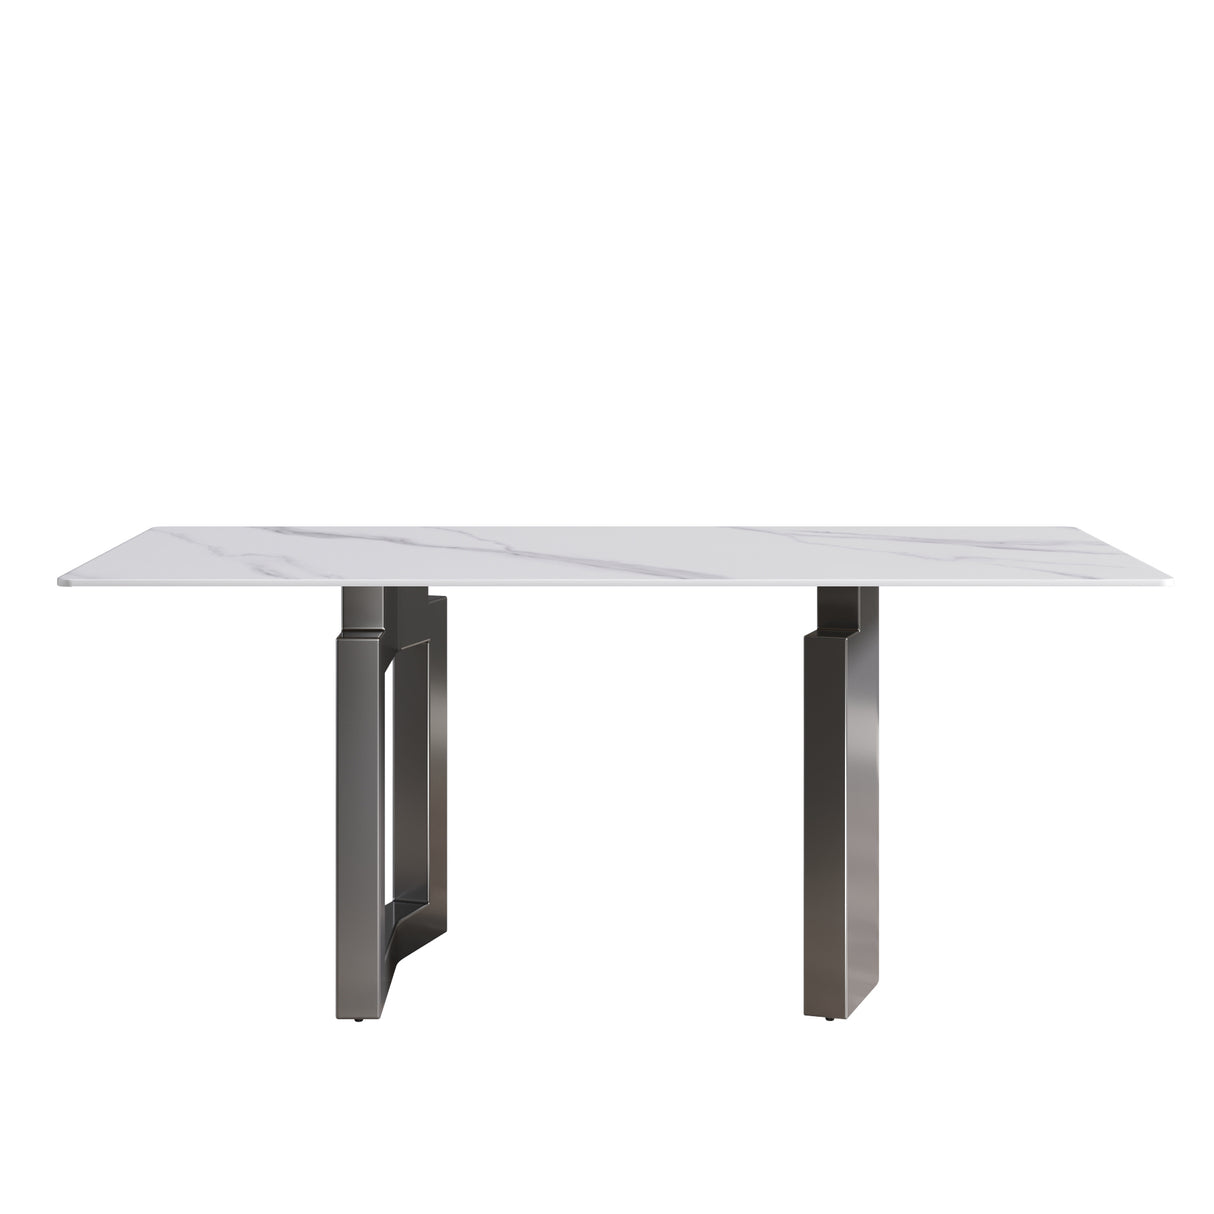 70.87" modern artificial stone white straight edge black metal leg dining table-can accommodate 6-8 people - Home Elegance USA